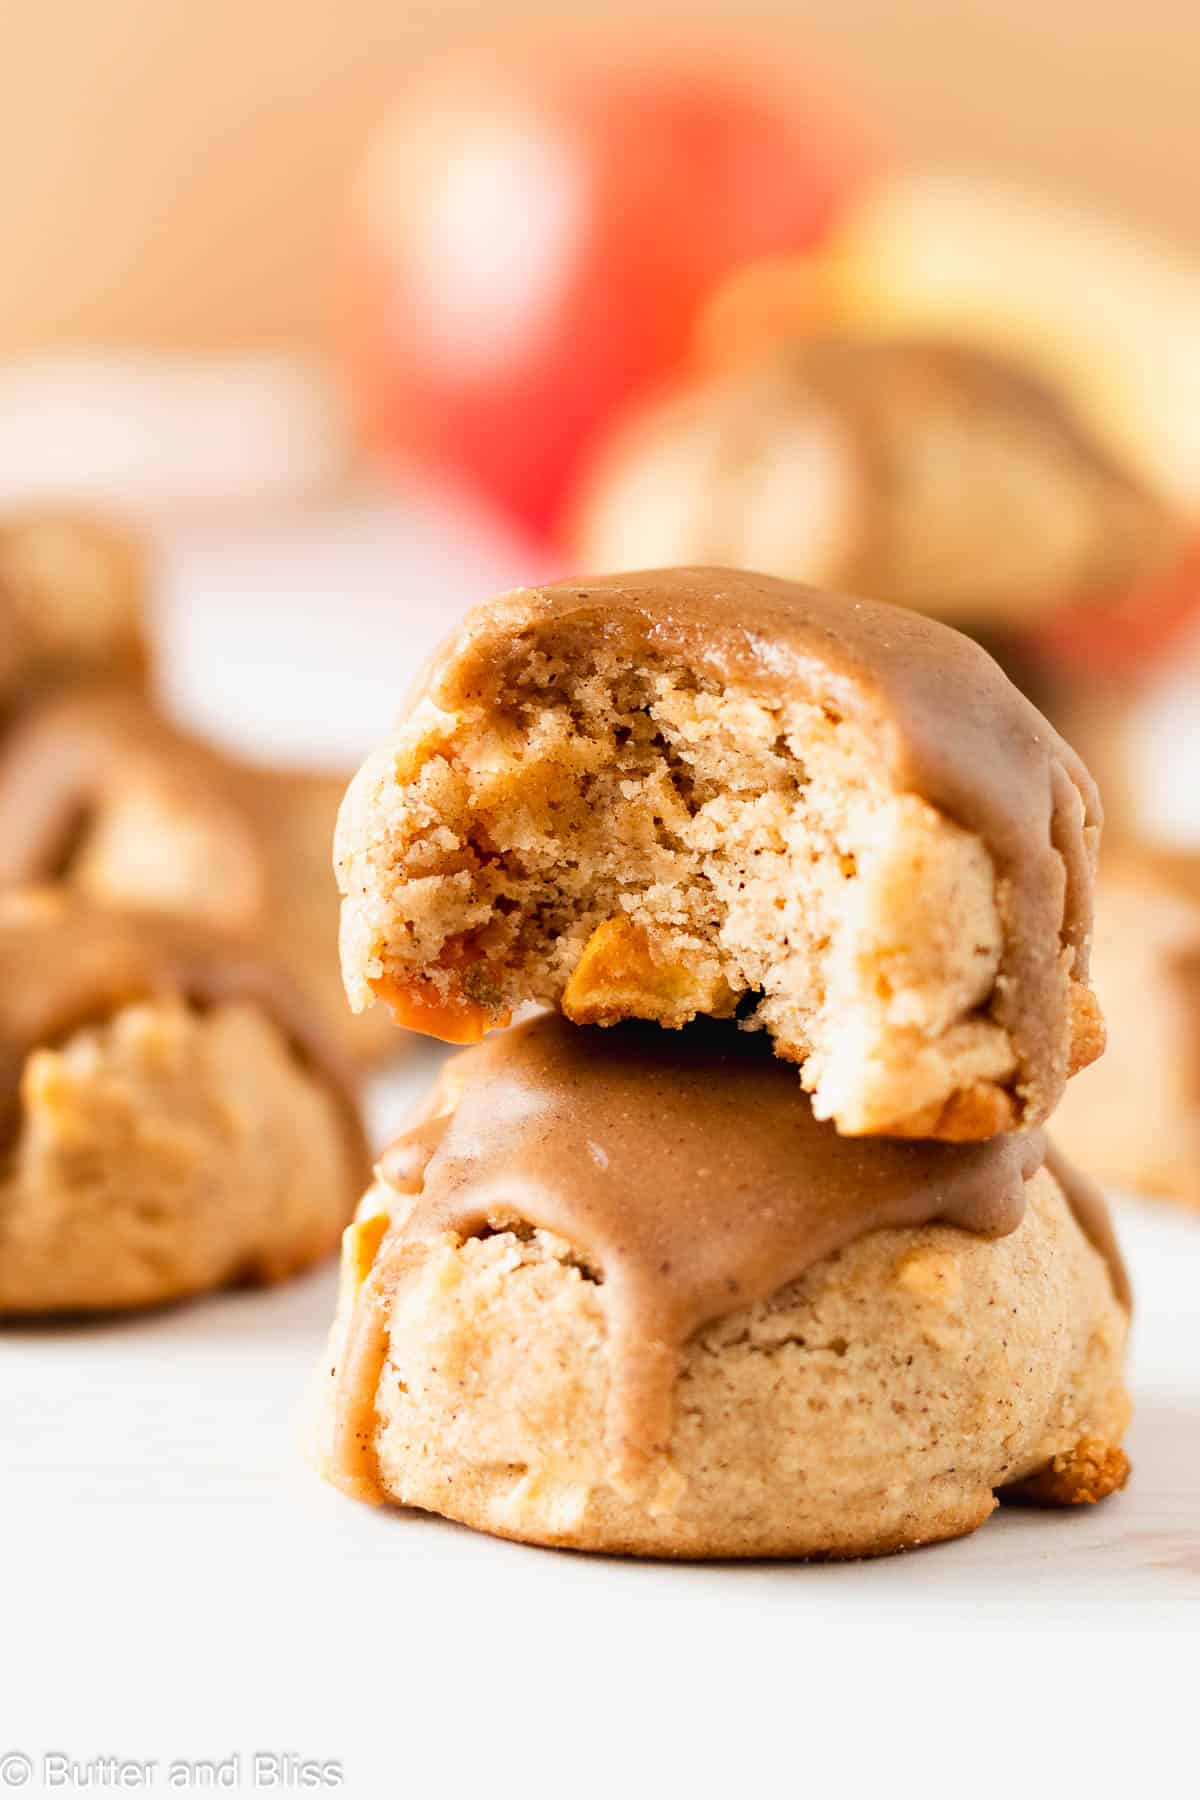 A beautiful bite shot of a soft caramel apple cookie stacked on another cookie.